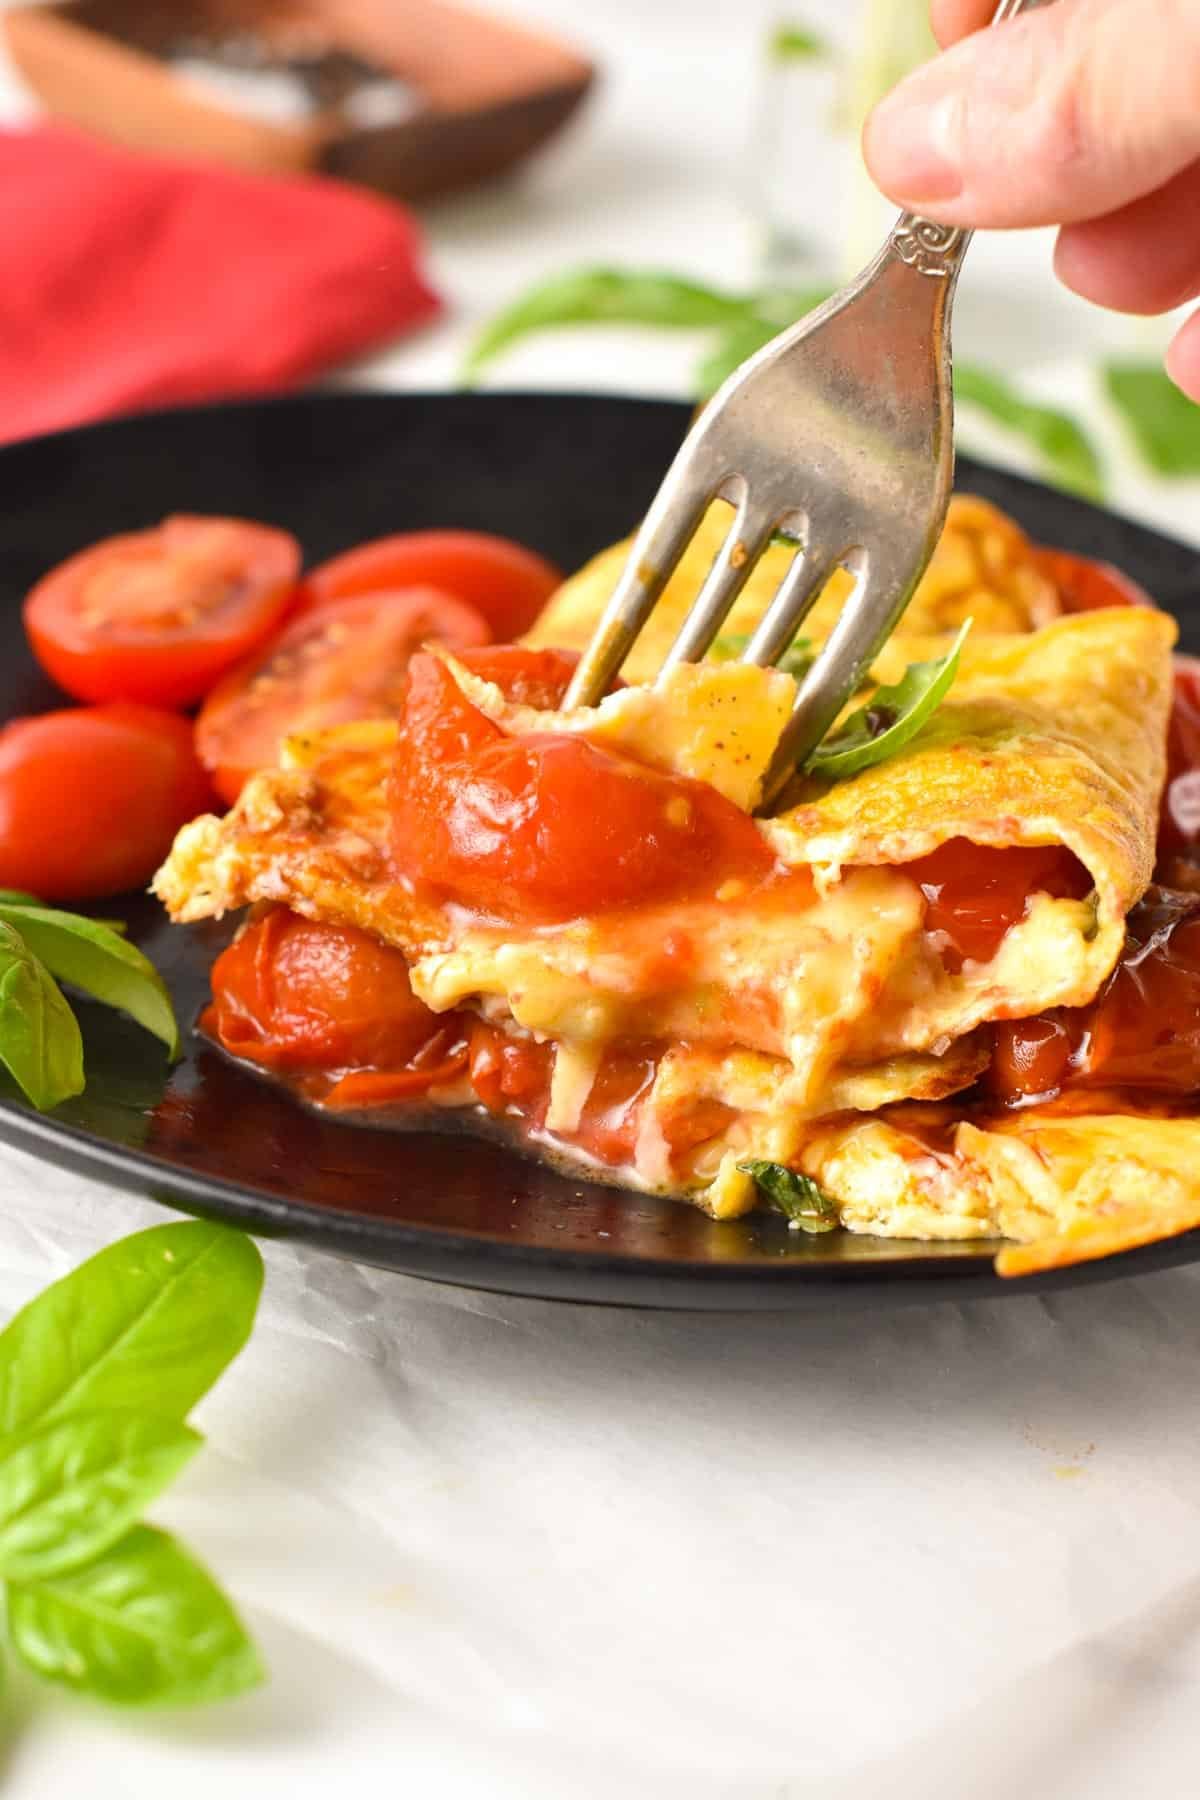 This Tomato Omelette is an easy, healthy breakfast recipe packed with summer flavors from juicy pan-fried cherry tomatoes, basil, and Parmesan cheese. If you love your eggs for breakfast, or you are looking for a fancy brunch, this omelette with tomato basil is a must-try.